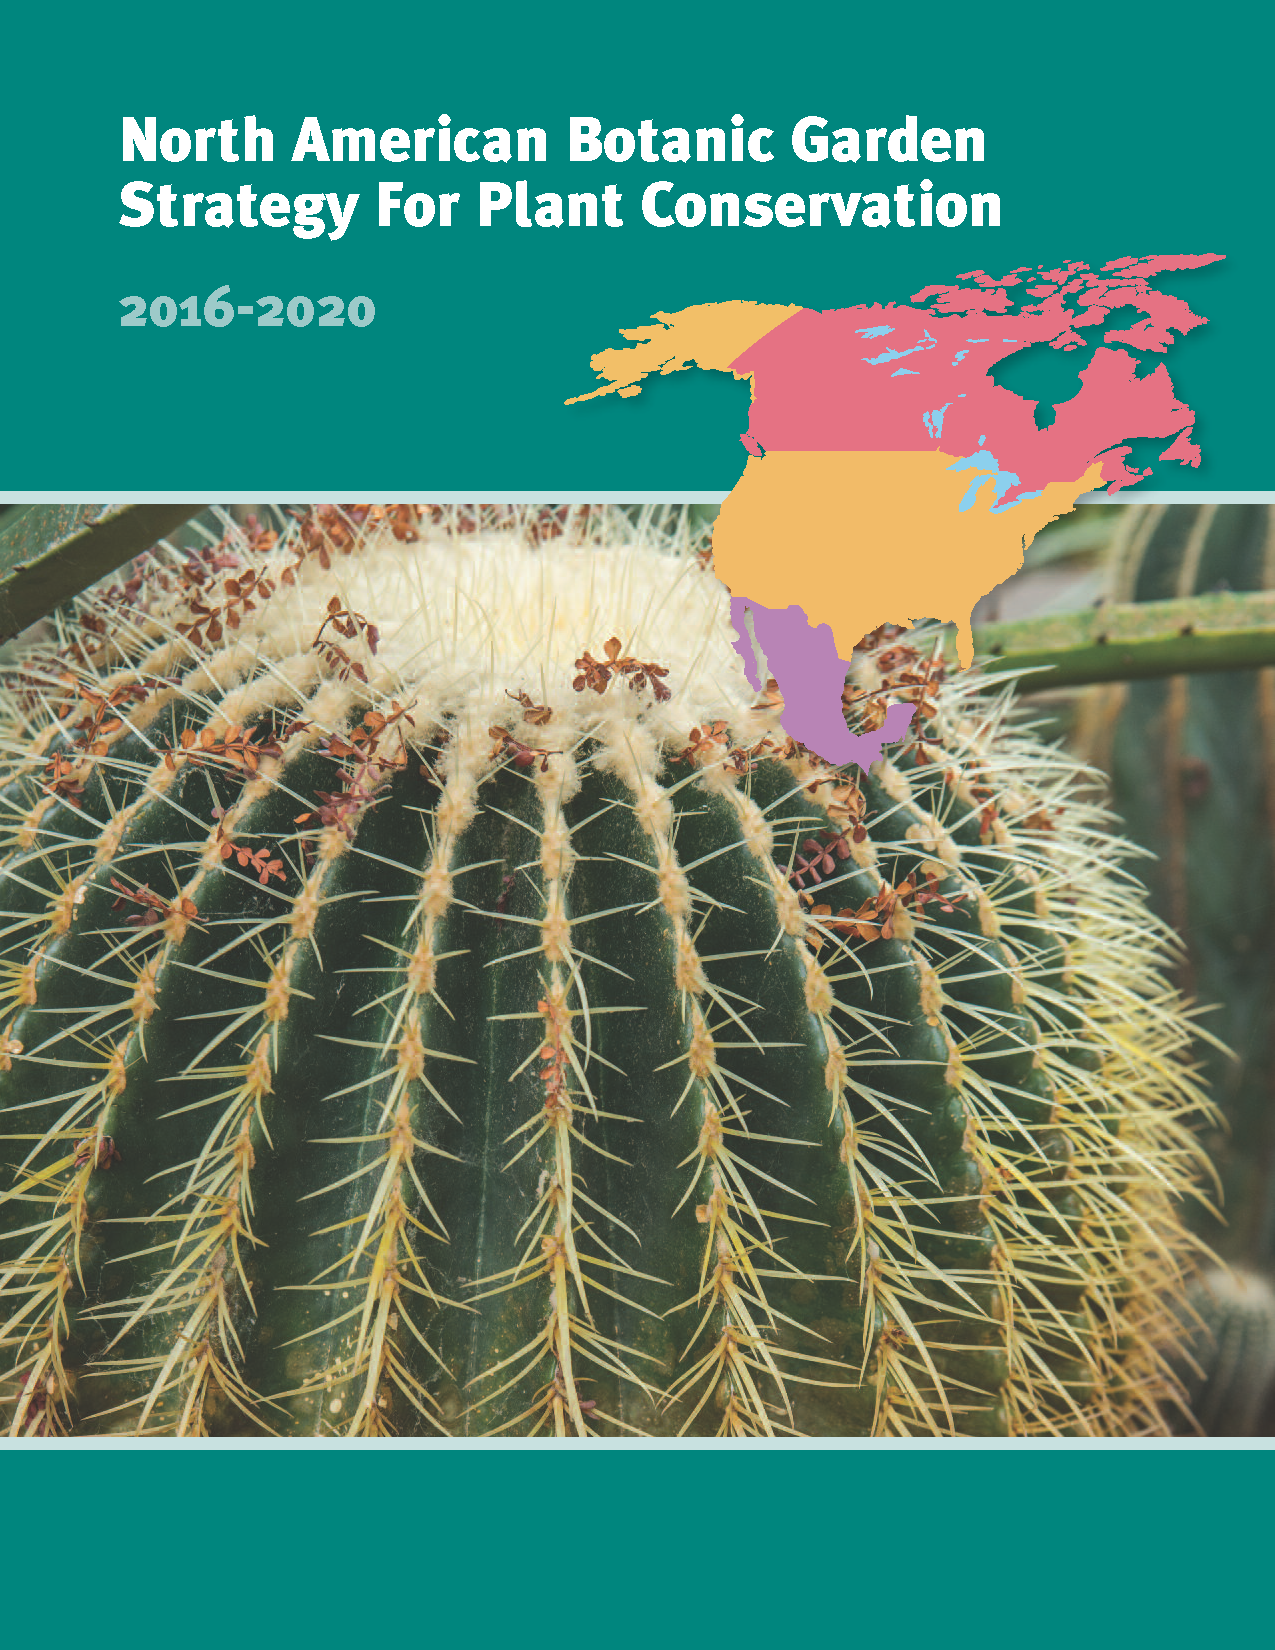 2016-2020 North American Botanic Garden Strategy for Plant Conservation